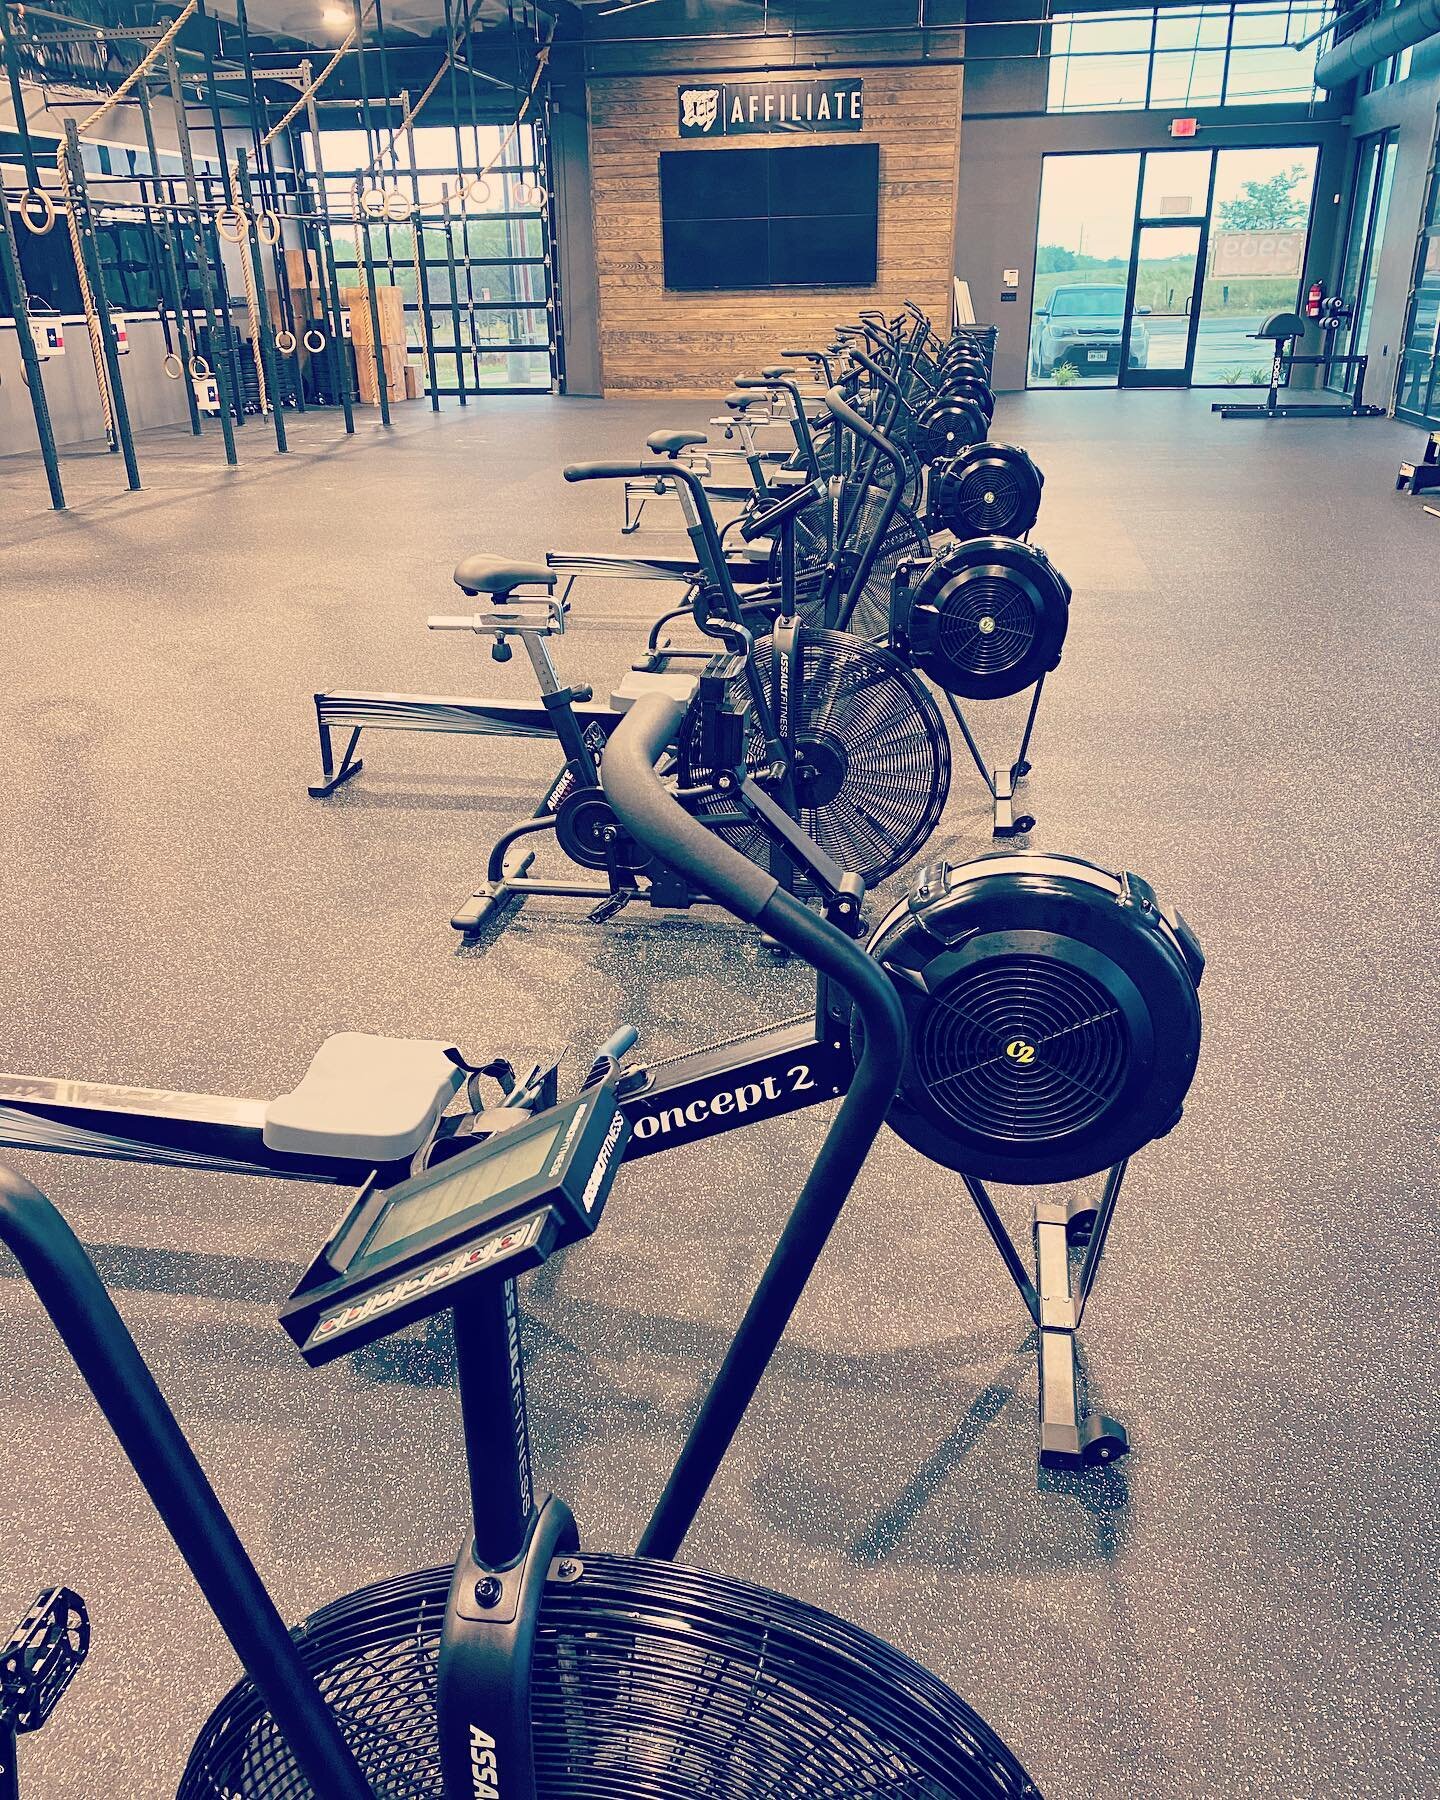 What&rsquo;s your first thoughts when you walk in the gym and see this? #crossfit #crossfittough #mayhemathlete #mayhemaffiliate #assaultbike #concept2rower